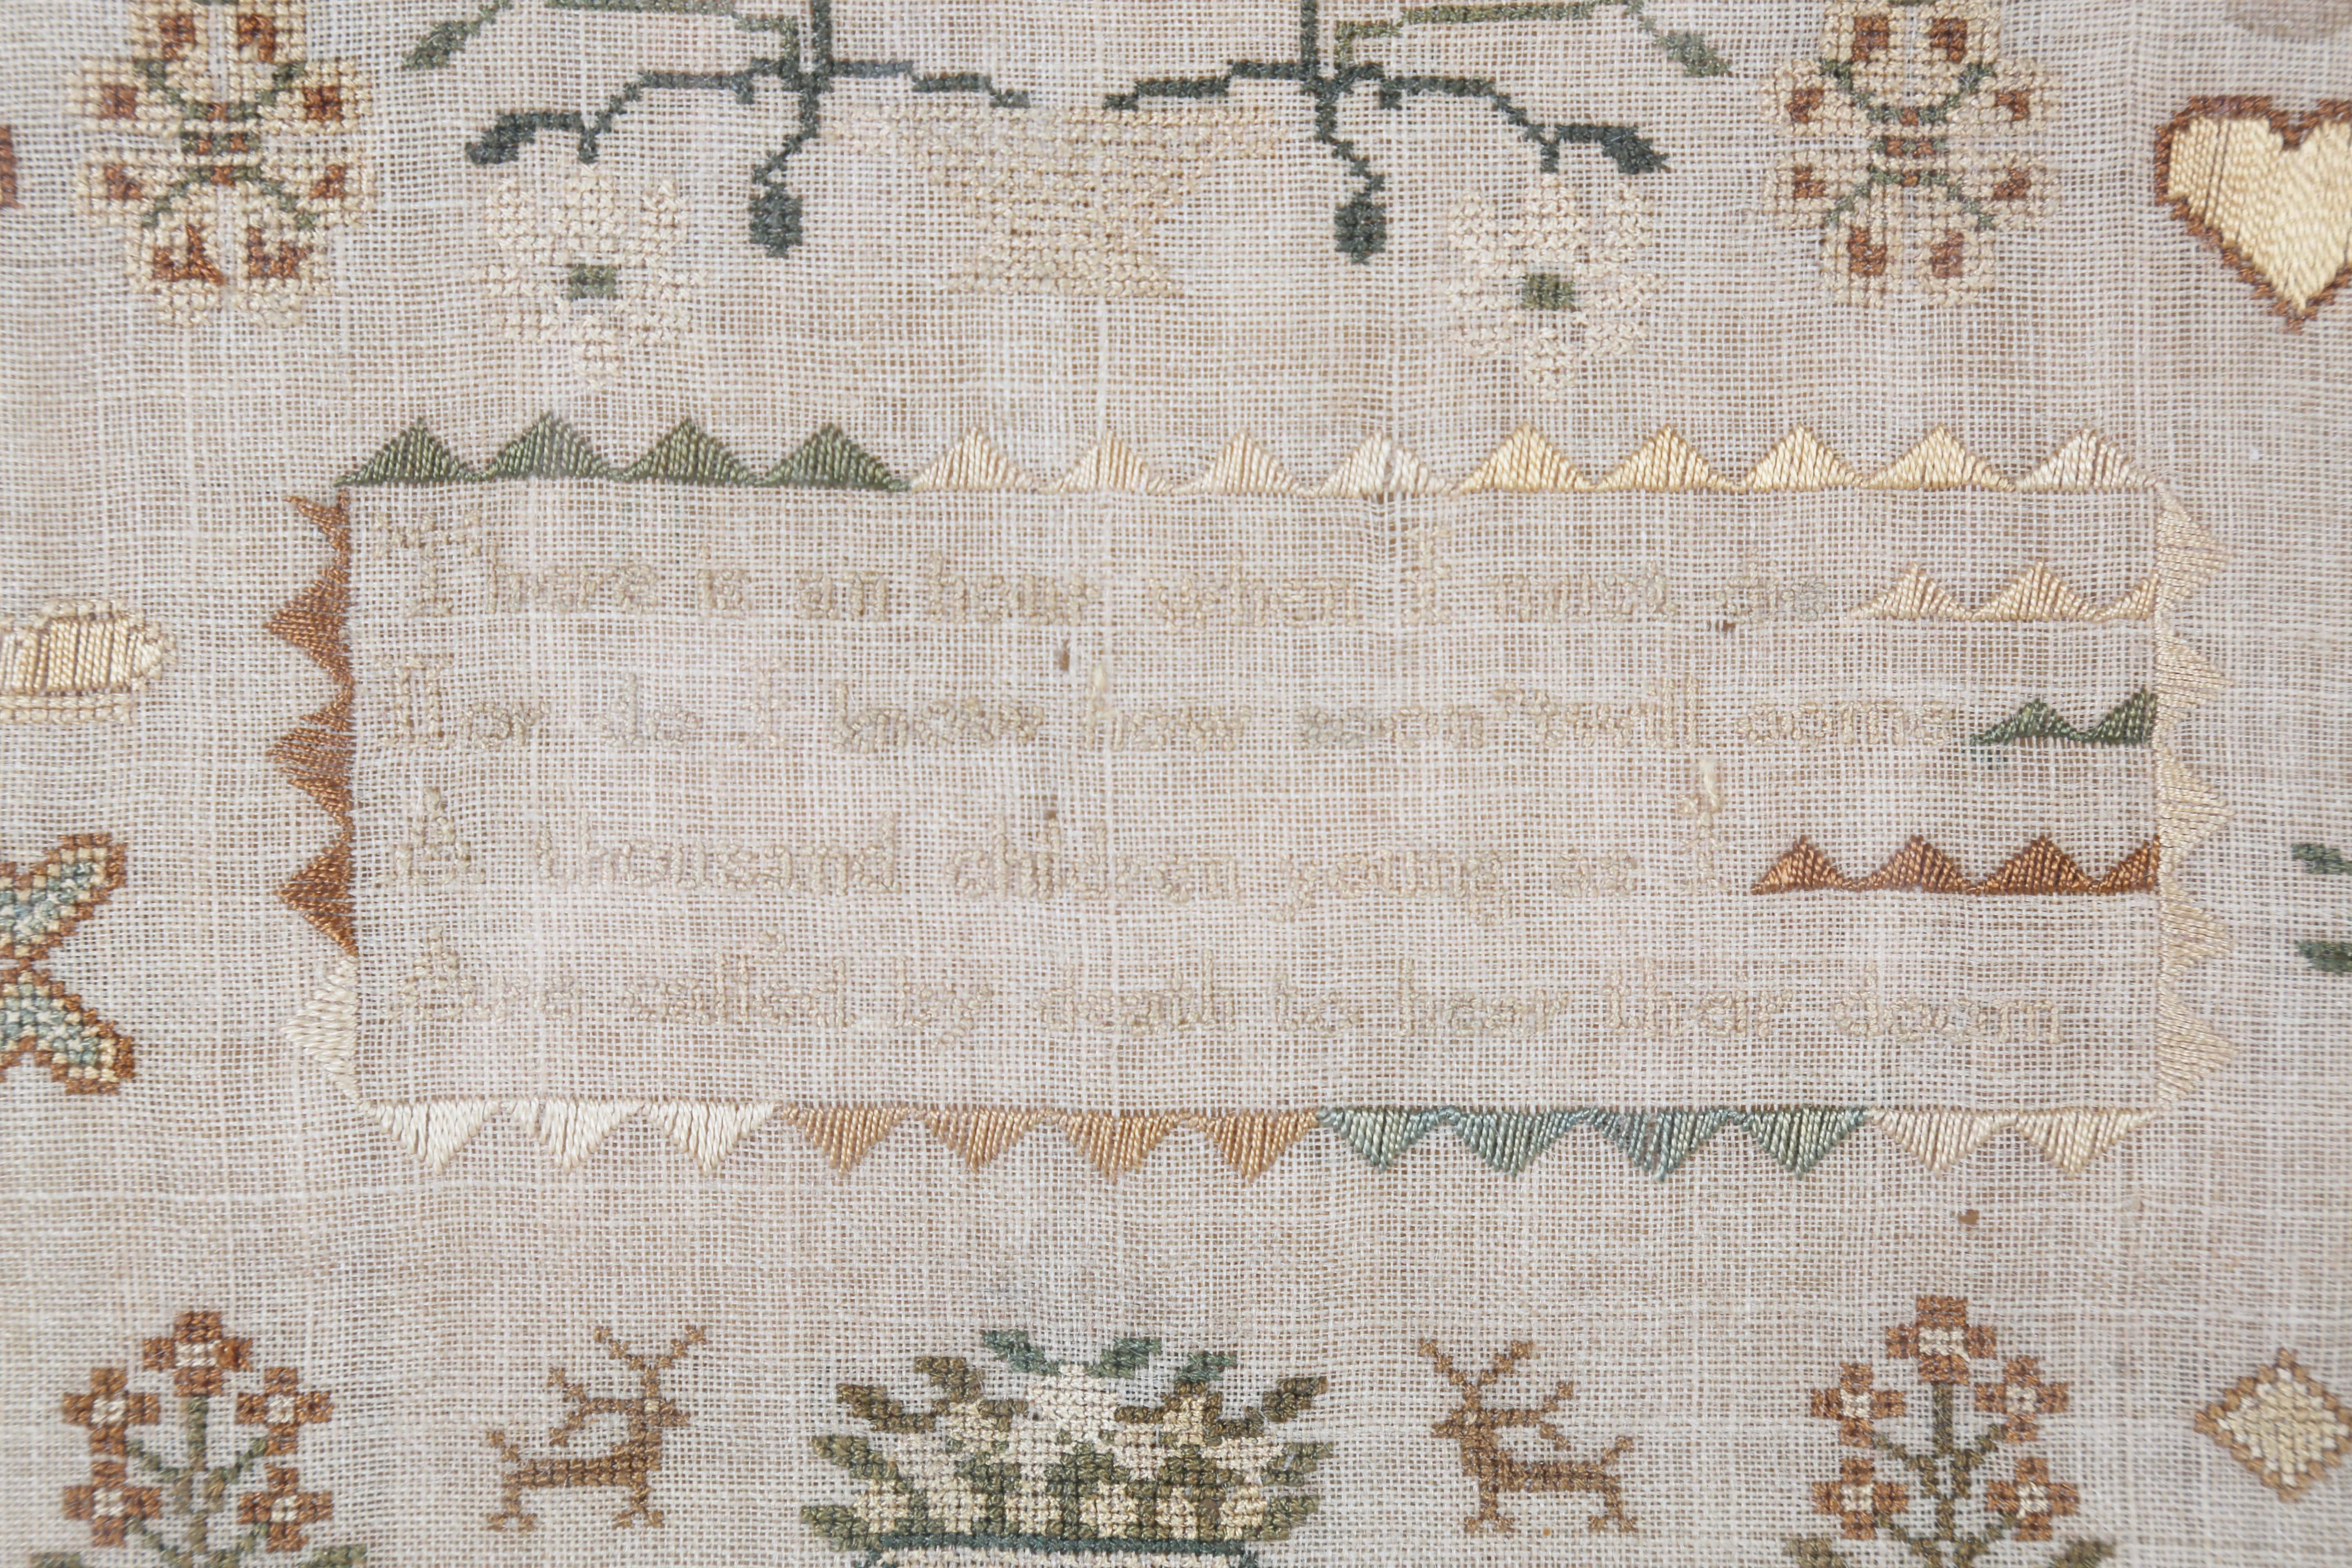 An early Victorian needlework sampler by Jane Constance, aged 13, dated 'January 6 1839', finely - Image 13 of 14